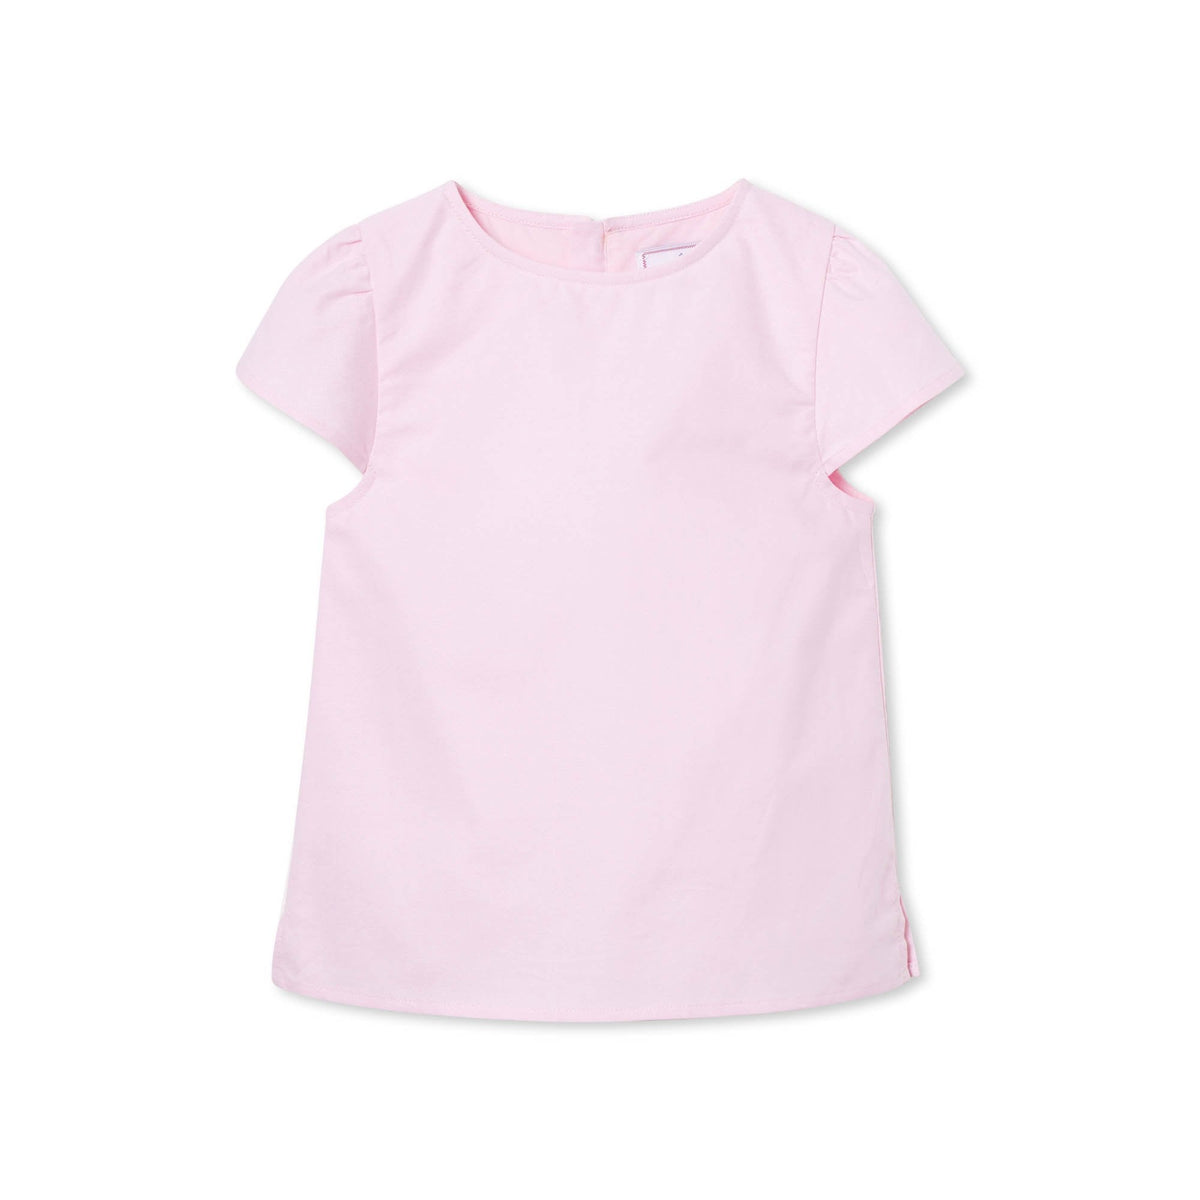 Classic and Preppy Sawyer Top, Pinkesque Oxford-Shirts and Tops-Pinkesque-2T-CPC - Classic Prep Childrenswear